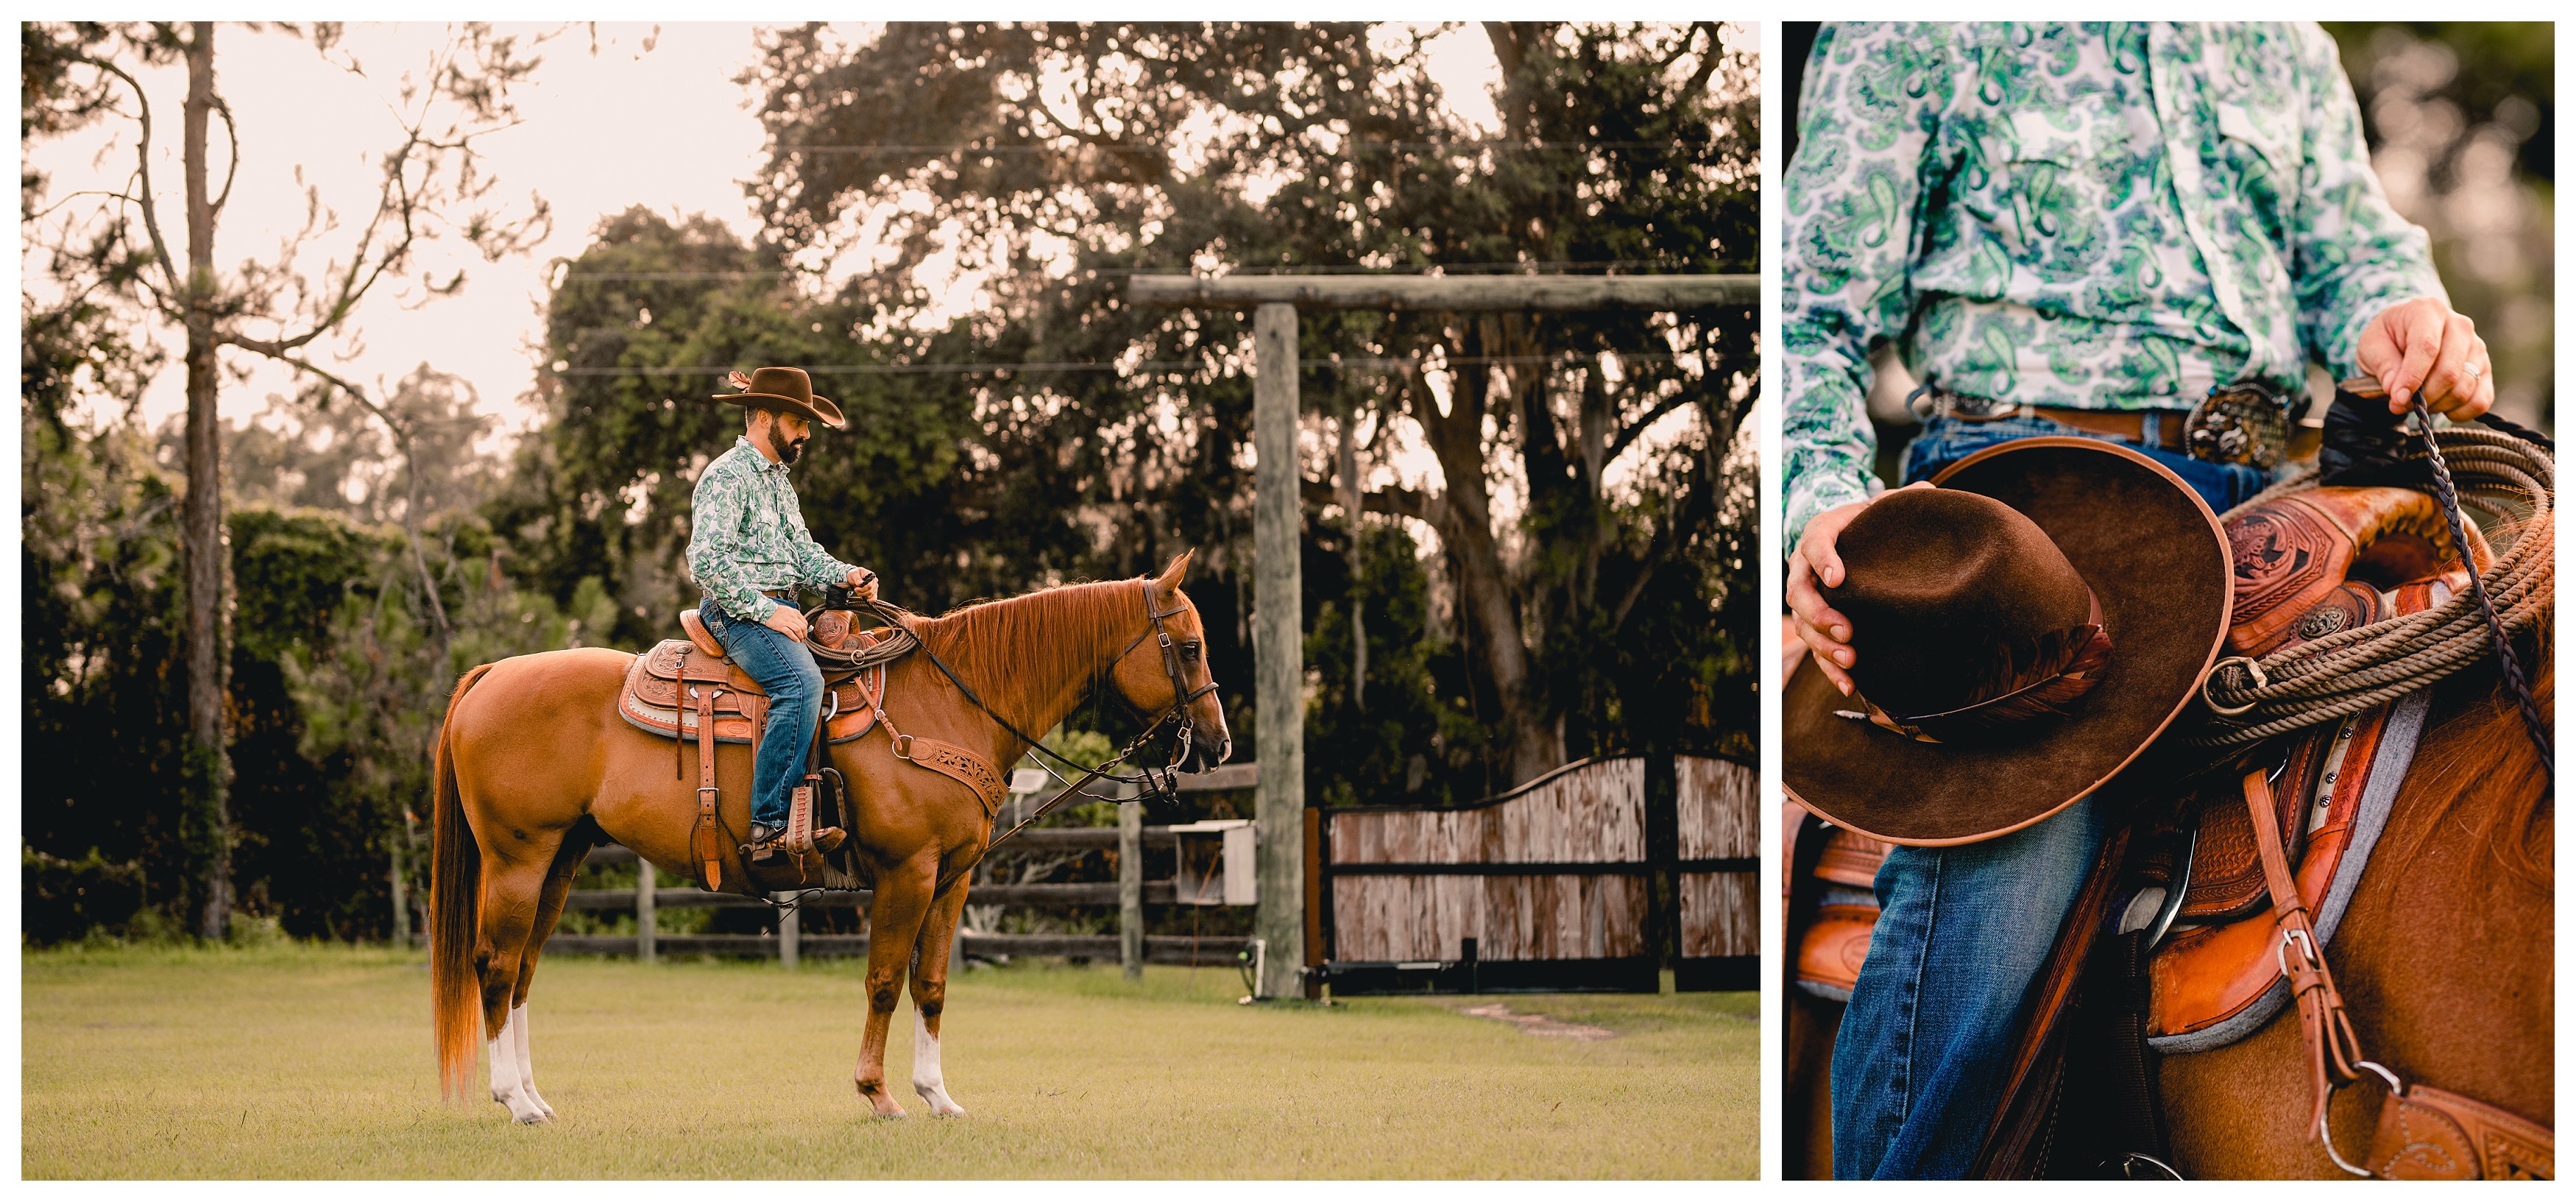 Portraits of a roping cowboy and his horse in Ocala, FL.